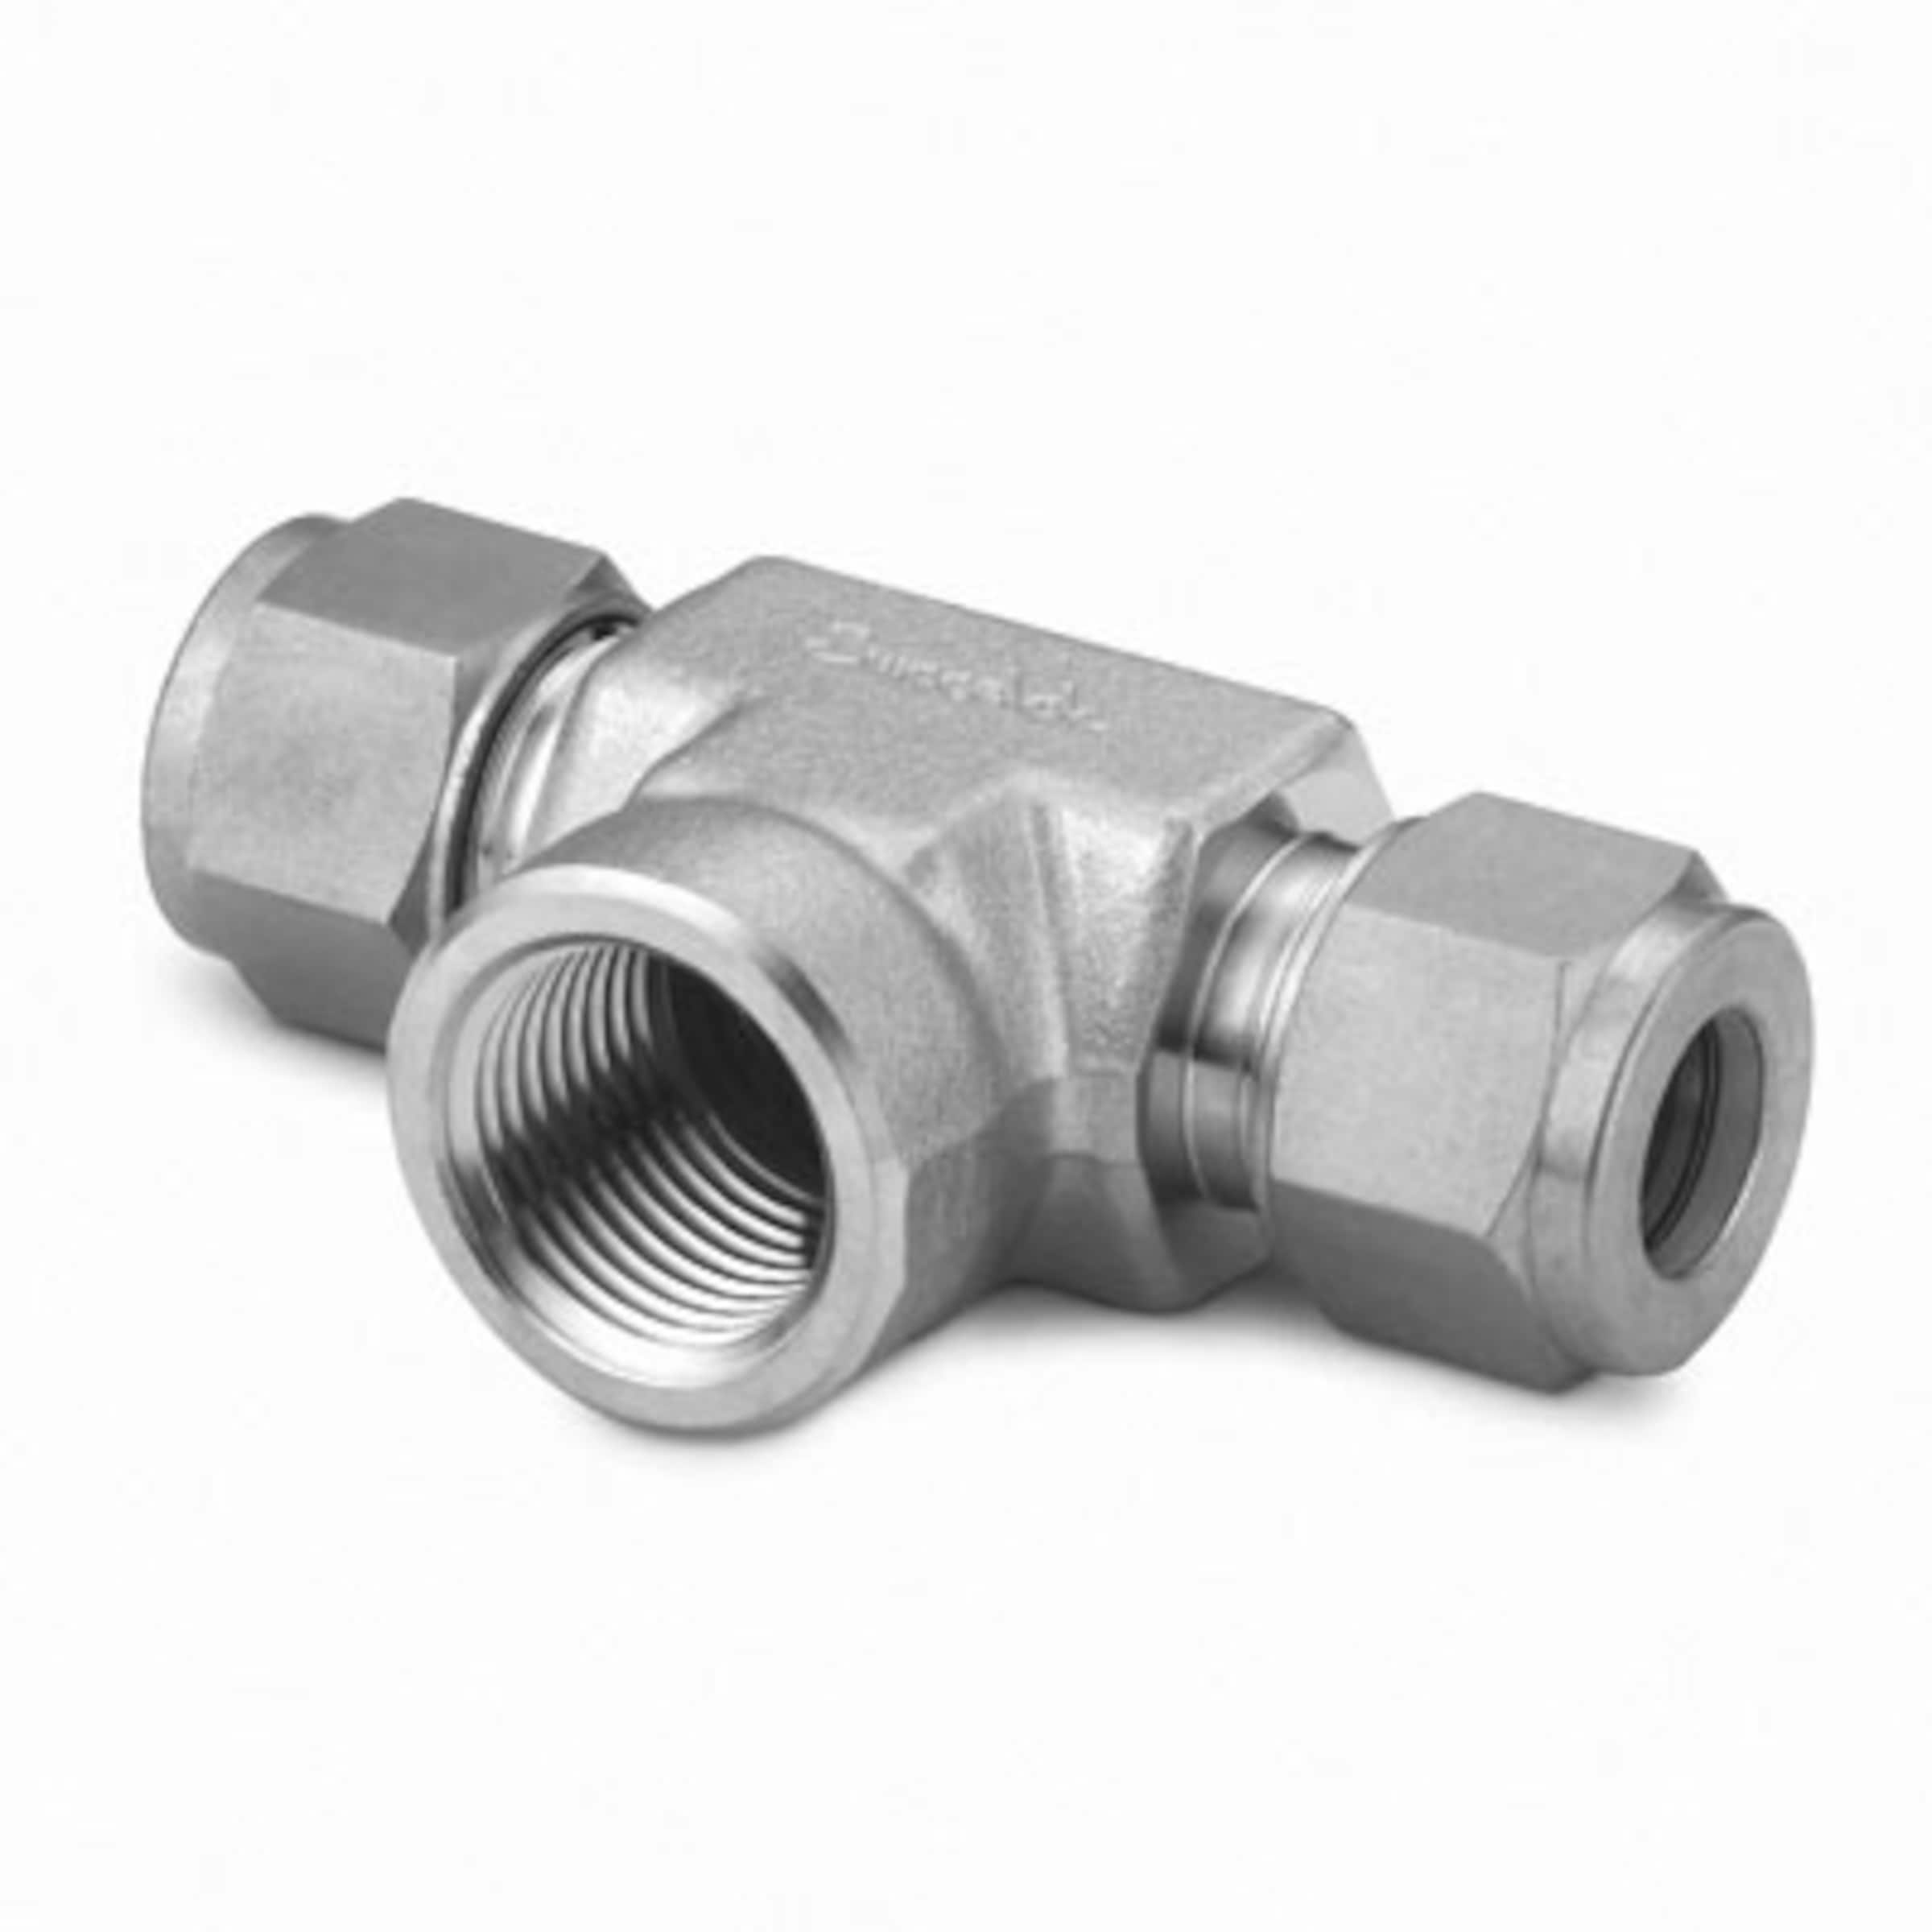 4x Swagelok Ss-6-t Tee Stainless Steel Pipe Fitting 3/8" Female NPT for sale online